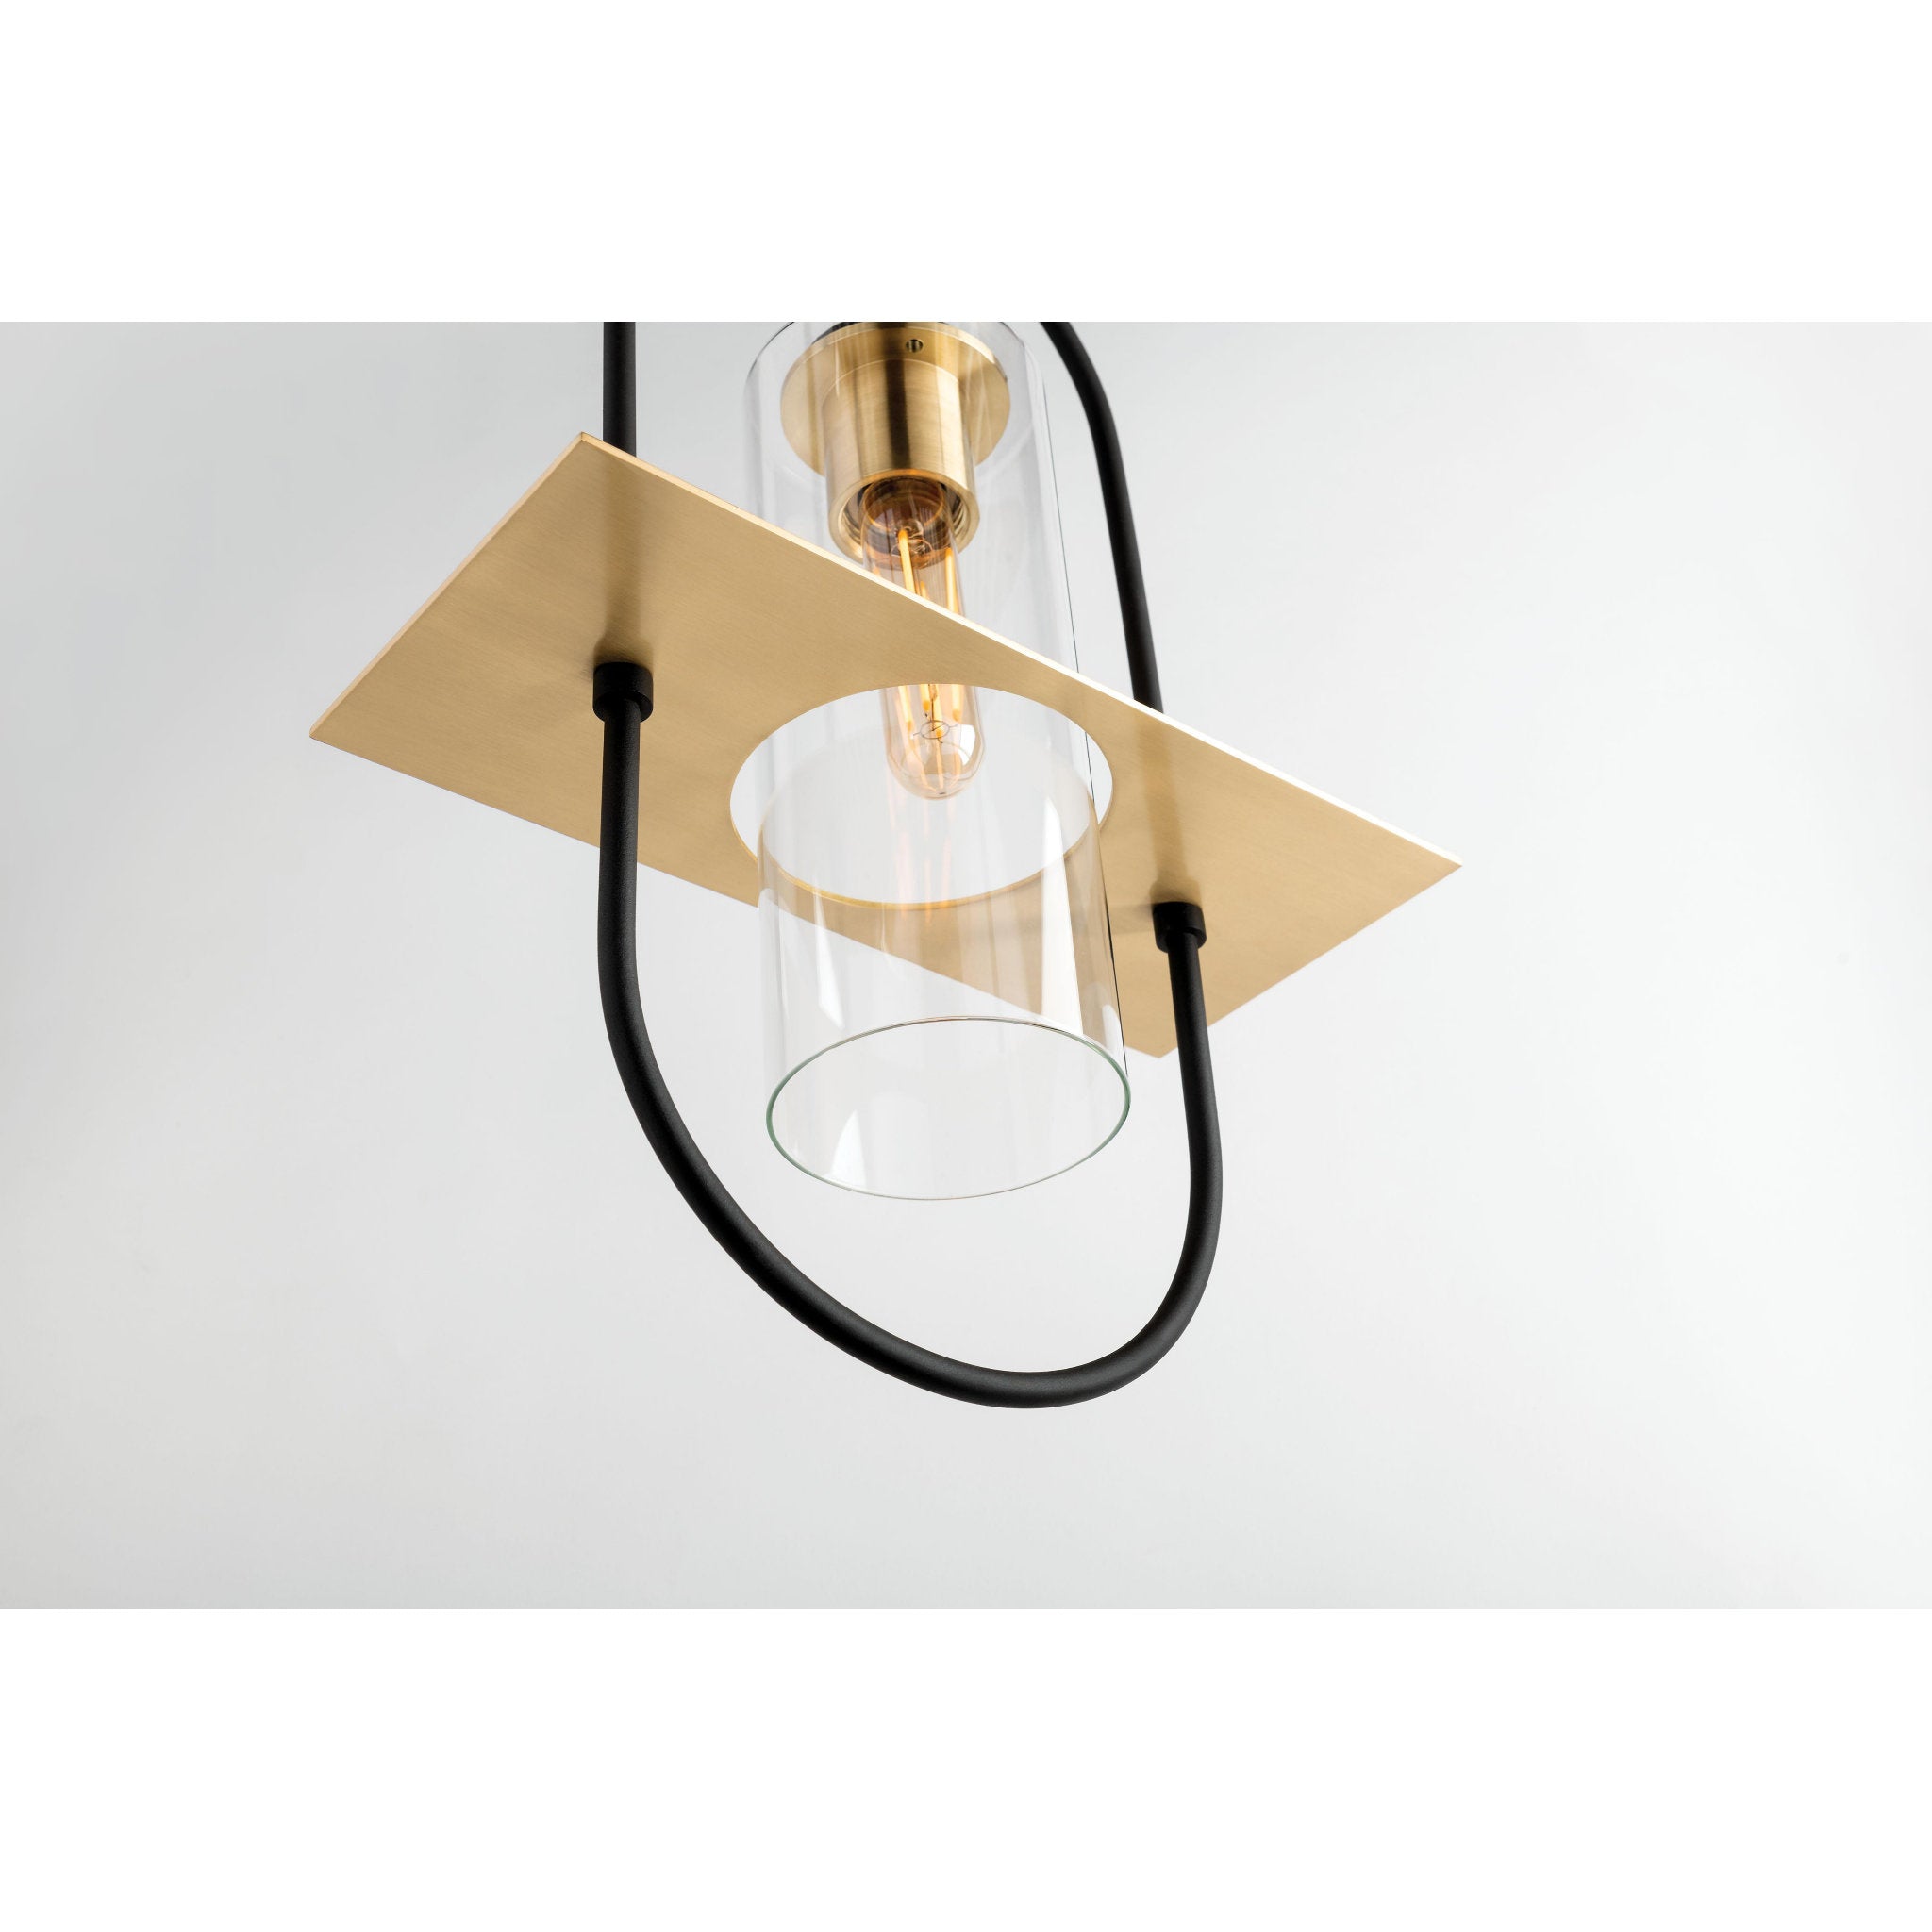 Smyth 1 Light Wall Sconce in Textured Bronze Brushed Brass